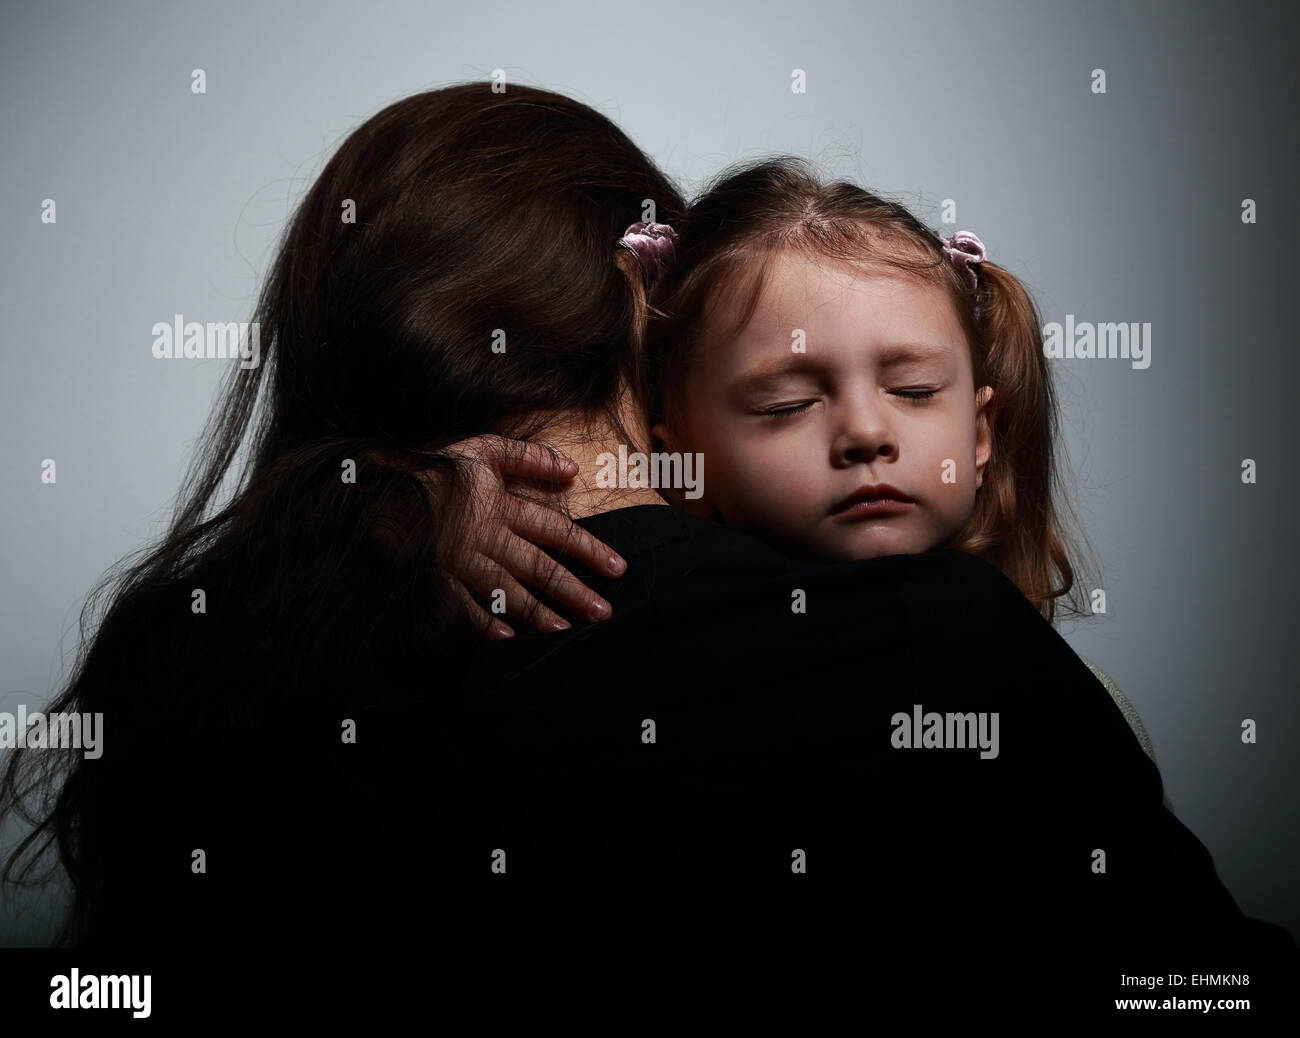 Sad crying daughter hugging her mother with sad face on dark shadows background Stock Photo